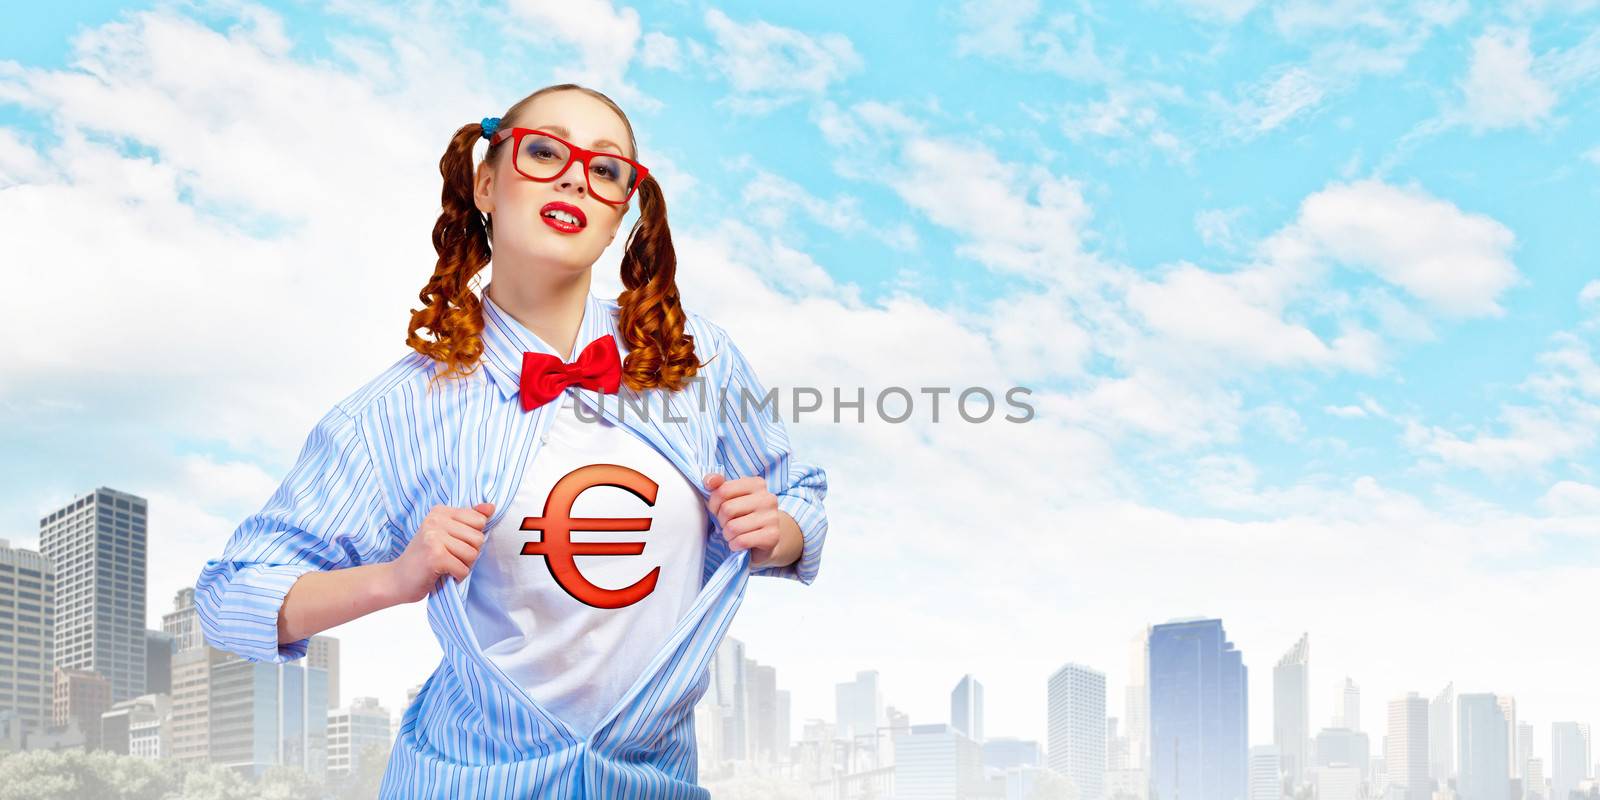 Young  super hero woman by sergey_nivens